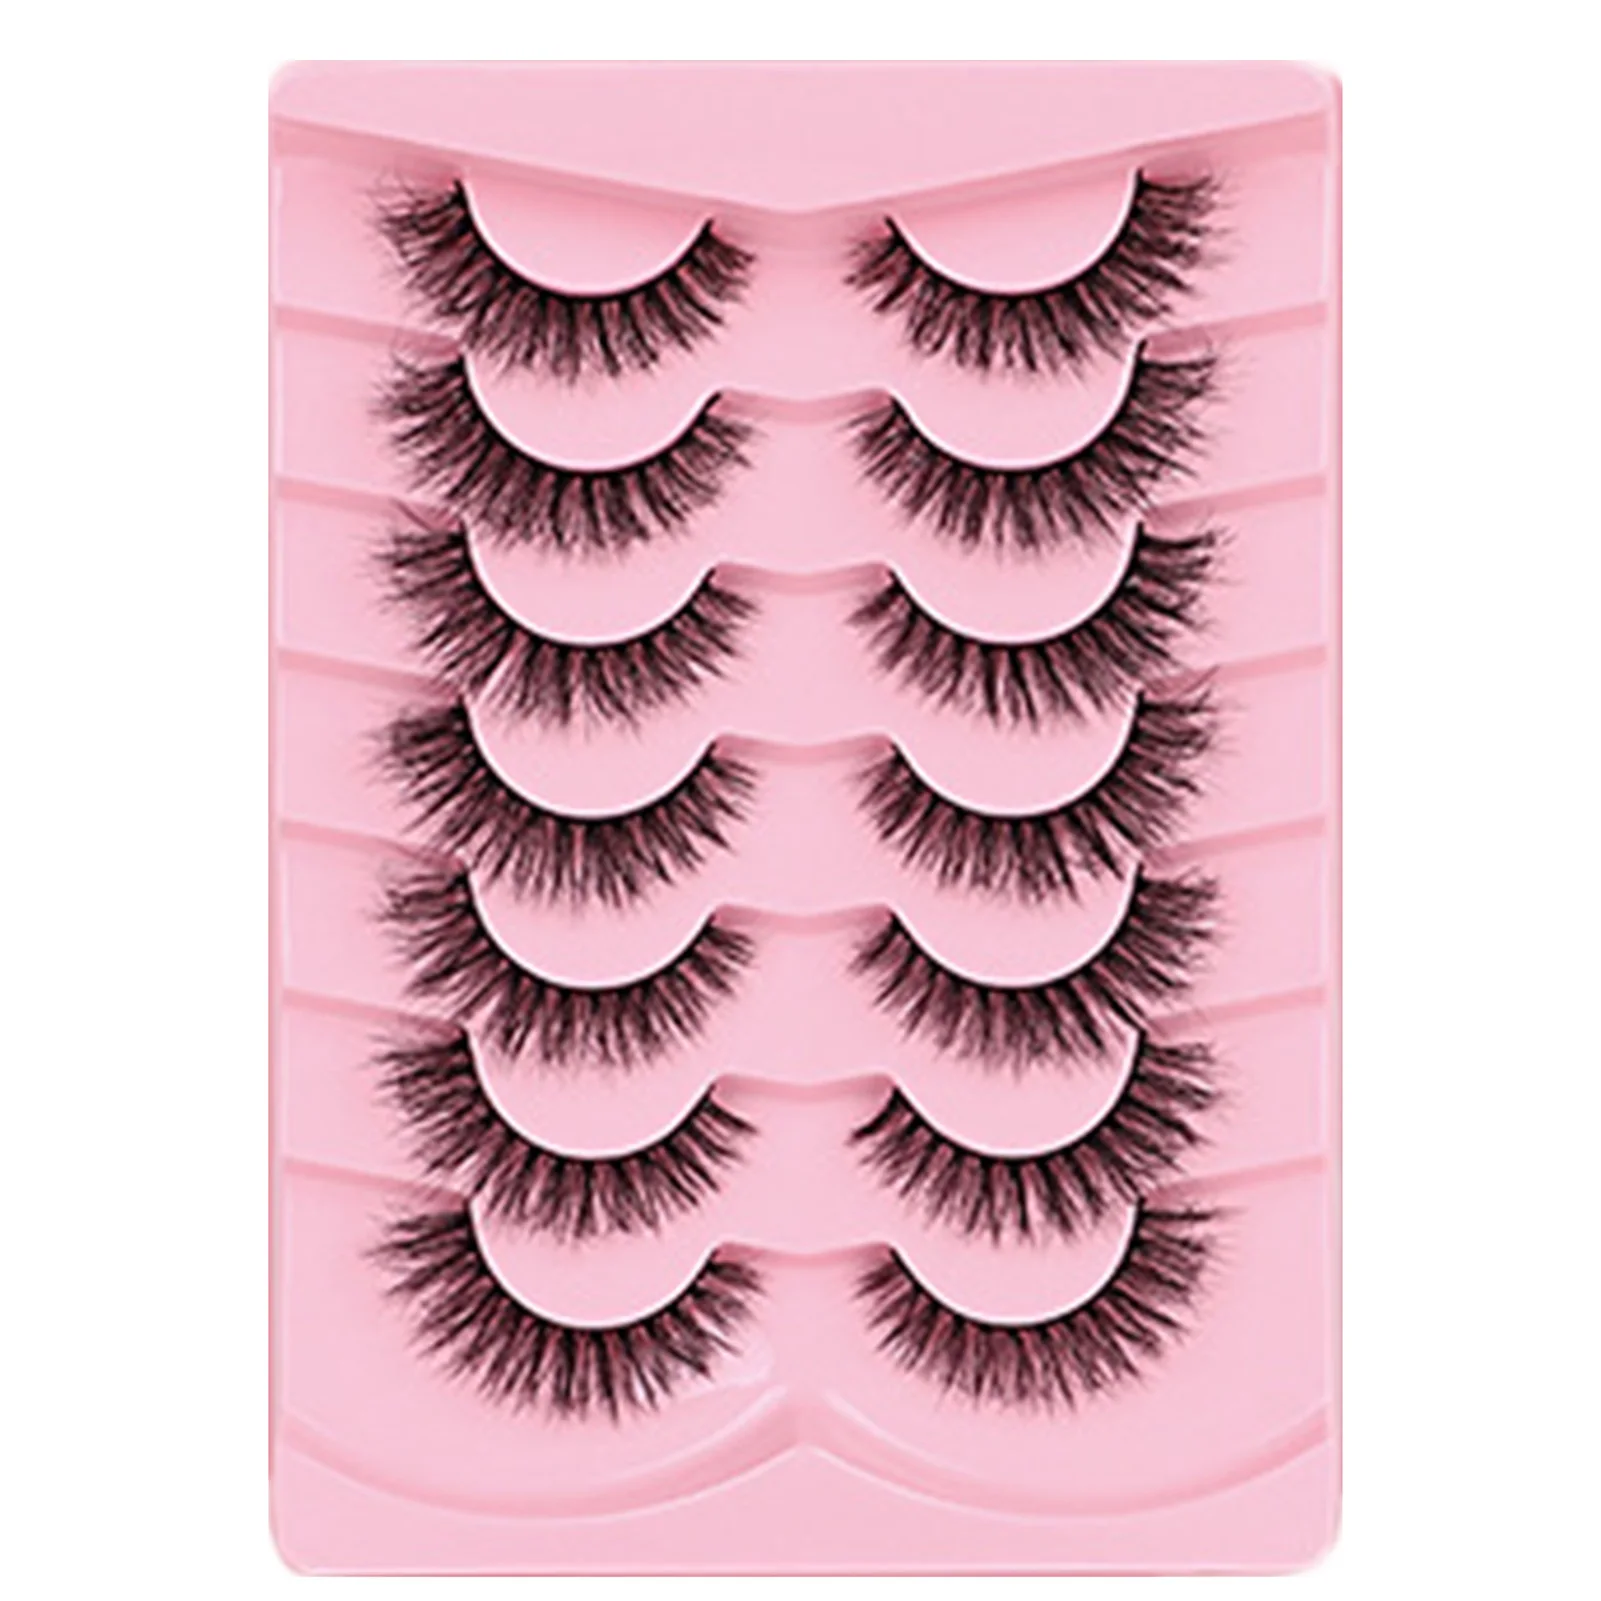 

Curling Thick Fake Eyelashes Fluffy Eye Makeup 3D Volume Lashes for Makeup Beauty Tools